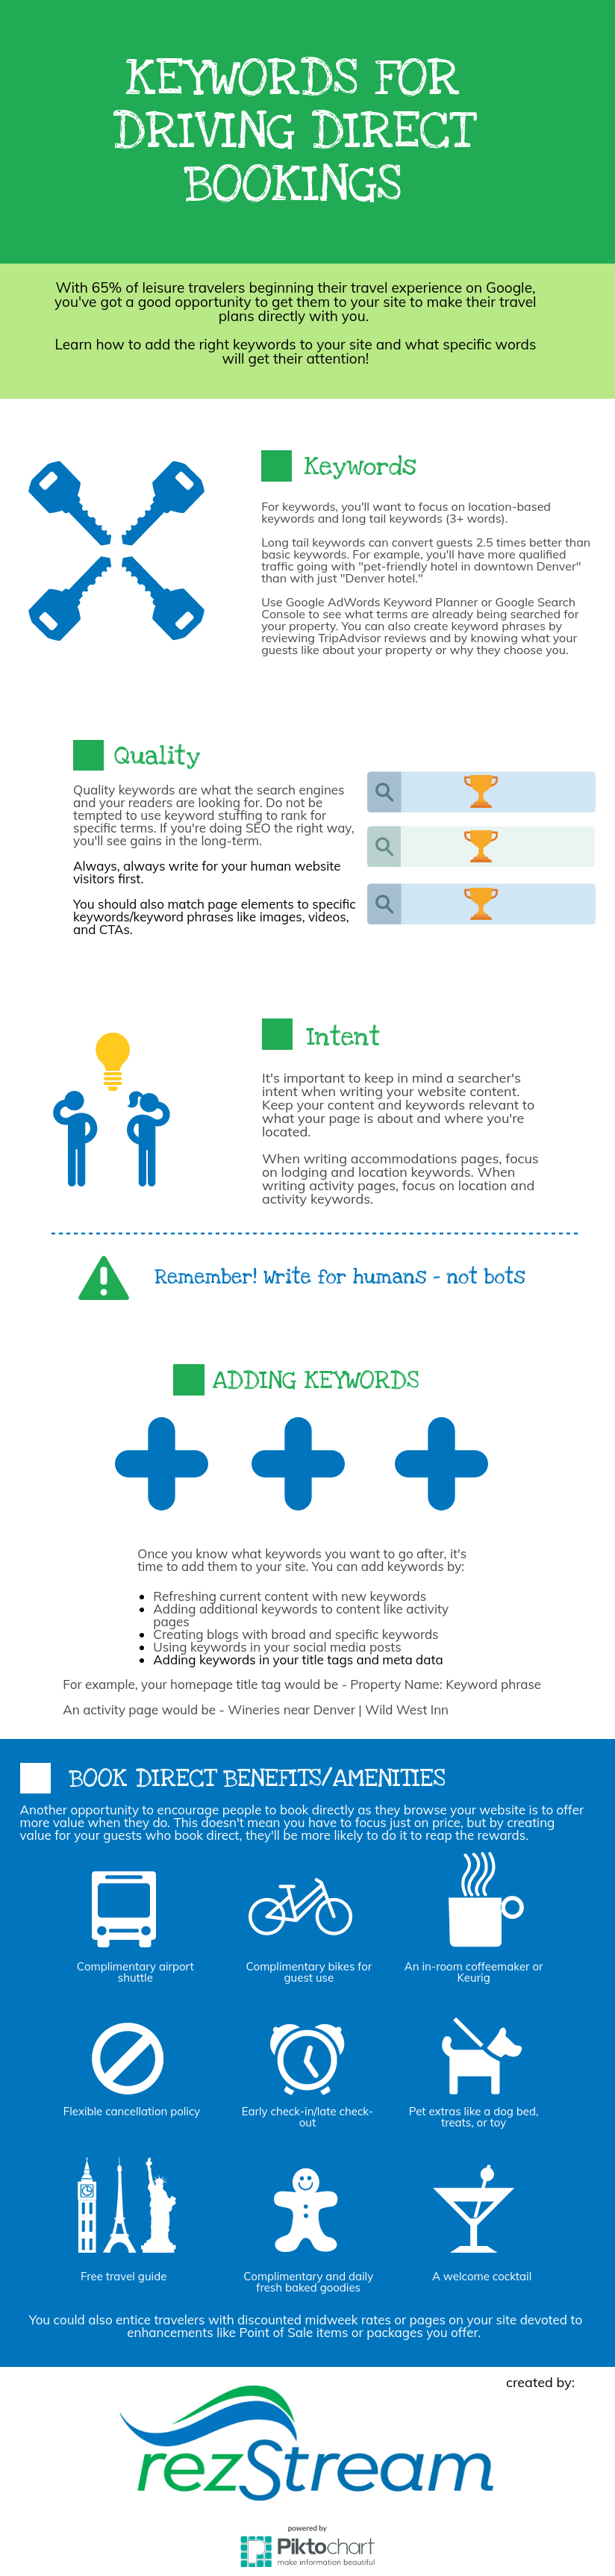 Keywords for driving direct bookings infographic